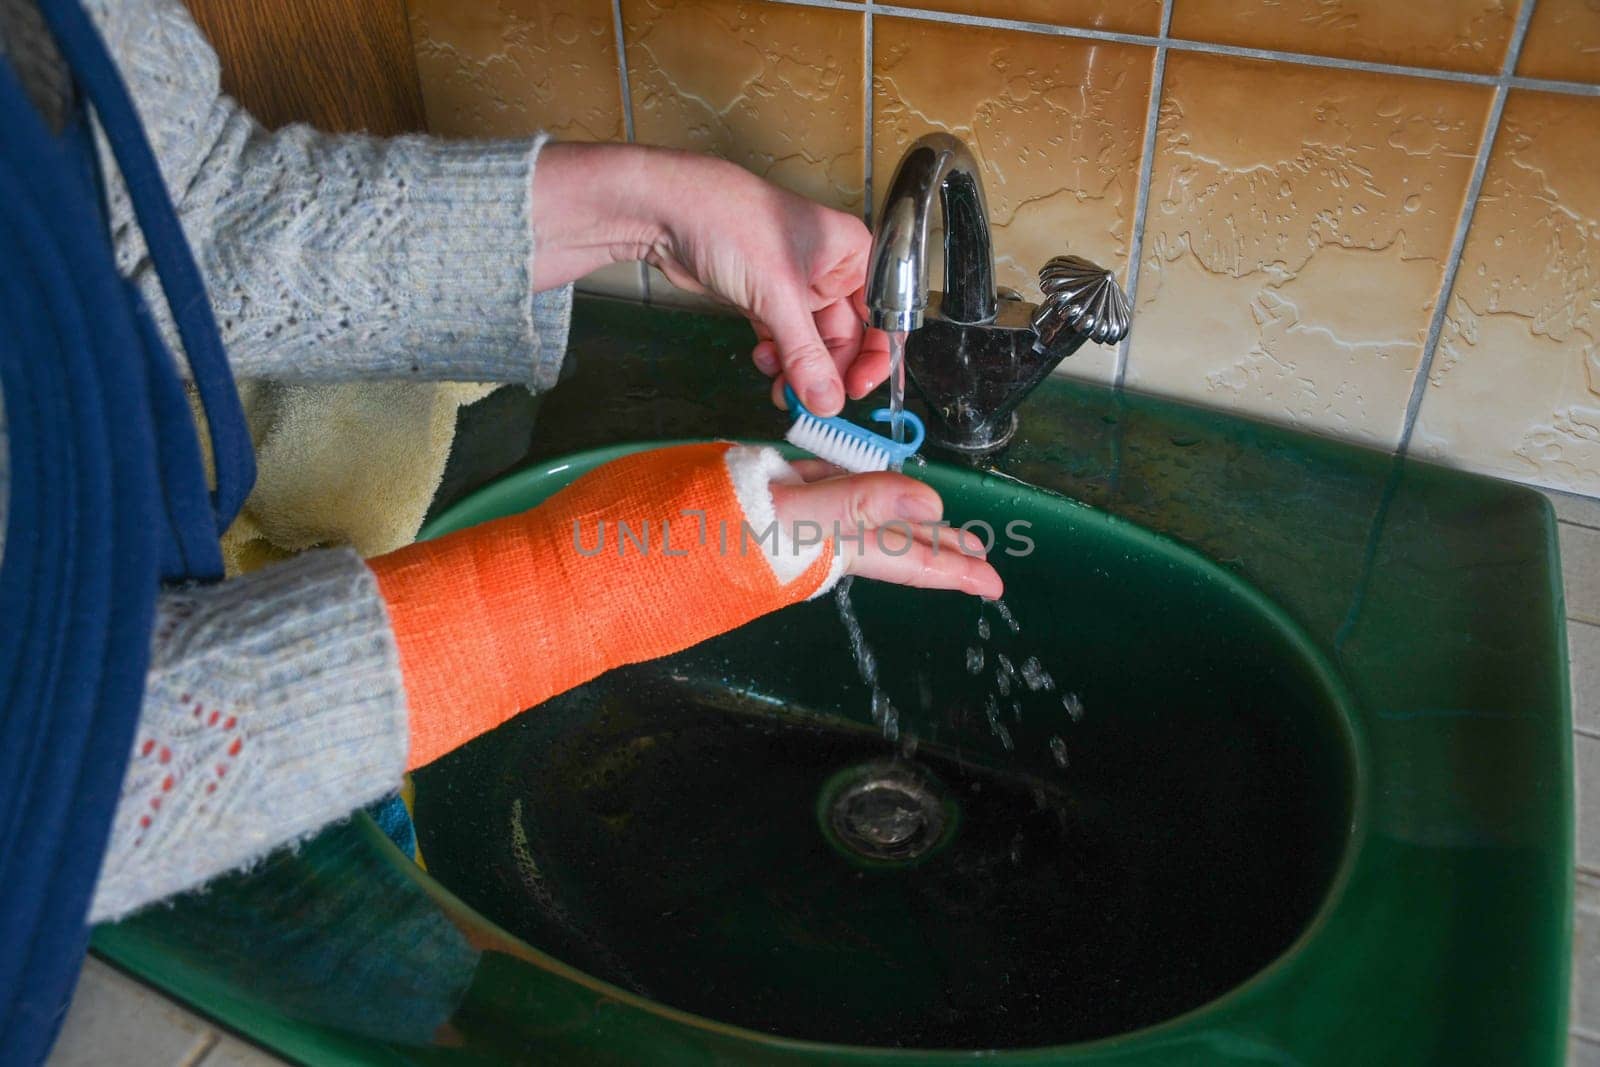 woman with a broken right arm in a cast washes her fingers free of a bandage under running water in the sink, maintaining hygiene, high quality photo